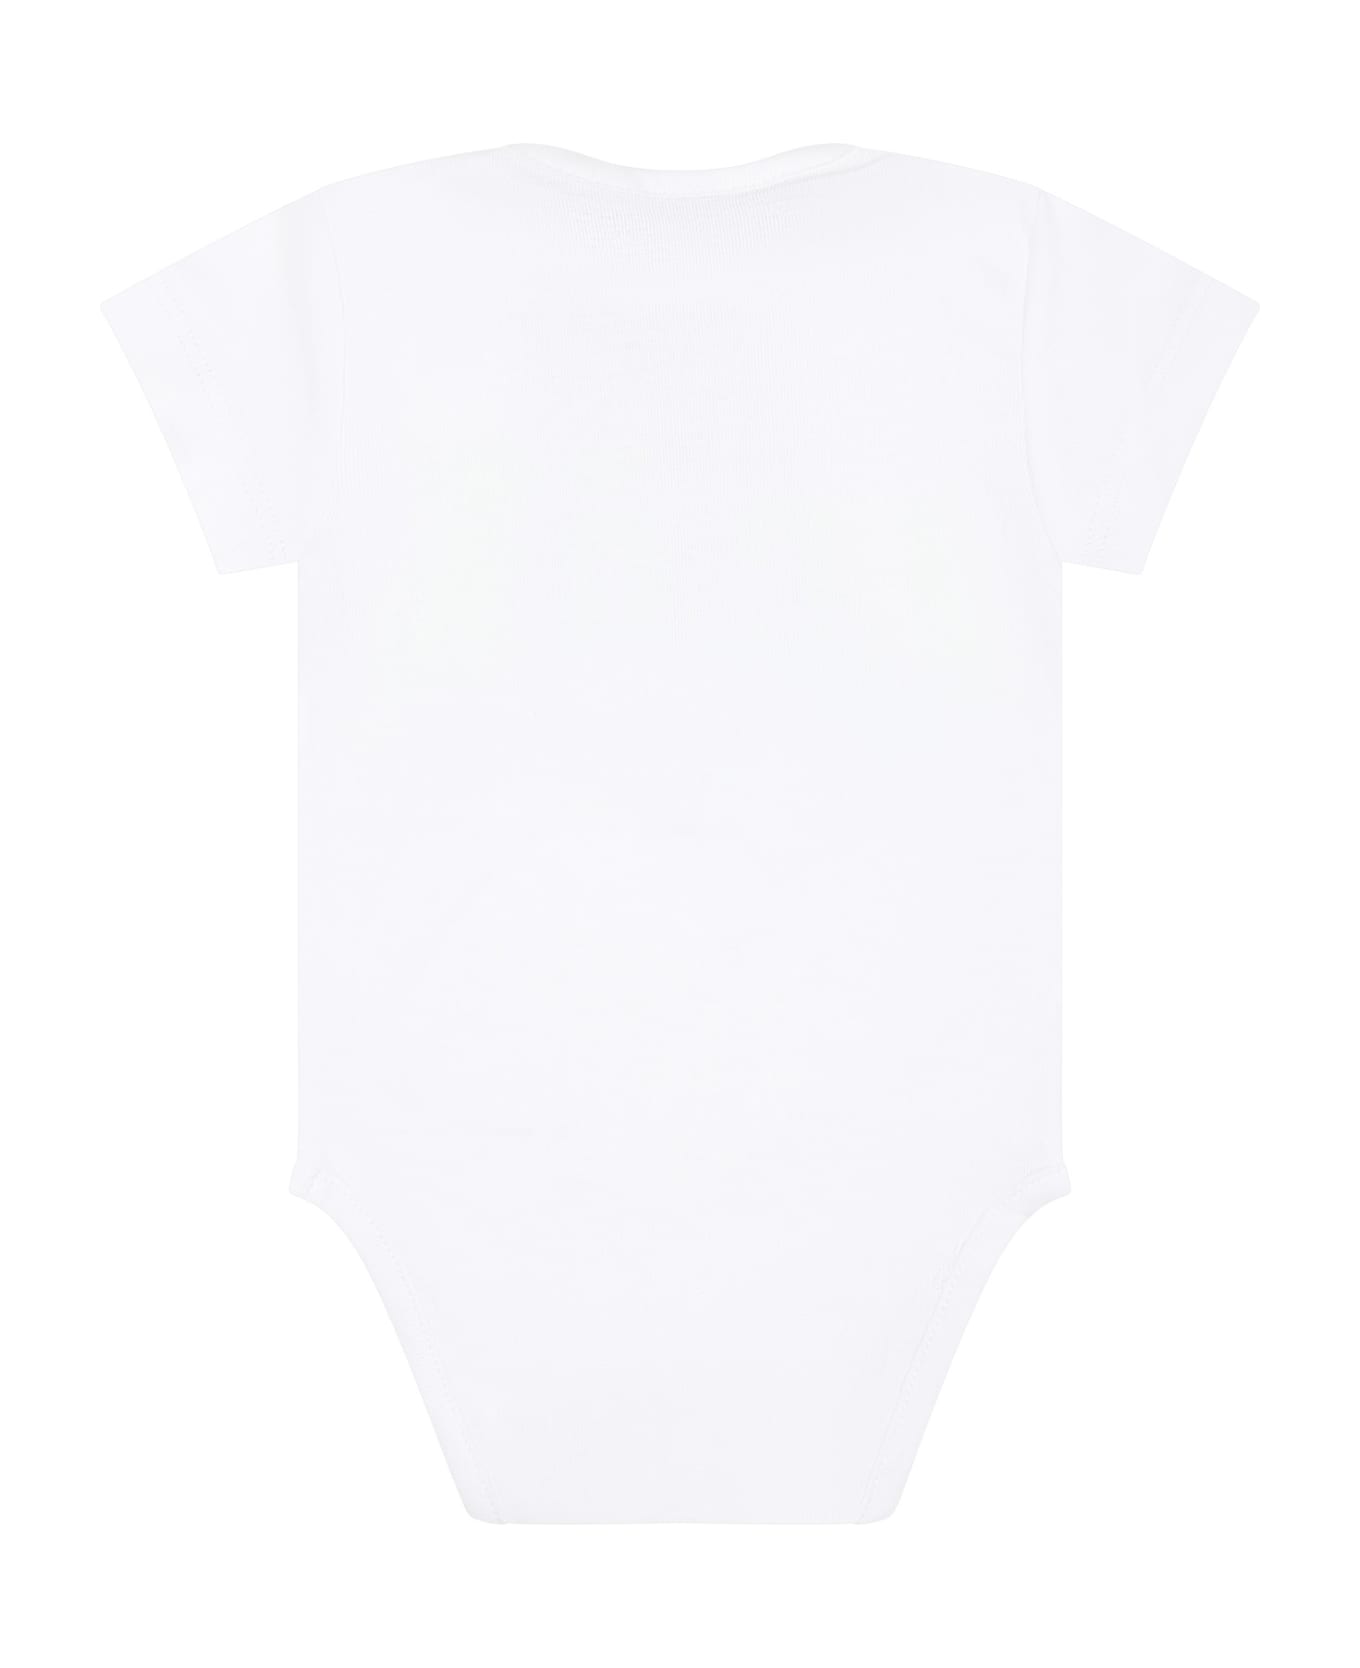 Dsquared2 White Bodysuit For Baby Boy With Logo - White ボディスーツ＆セットアップ